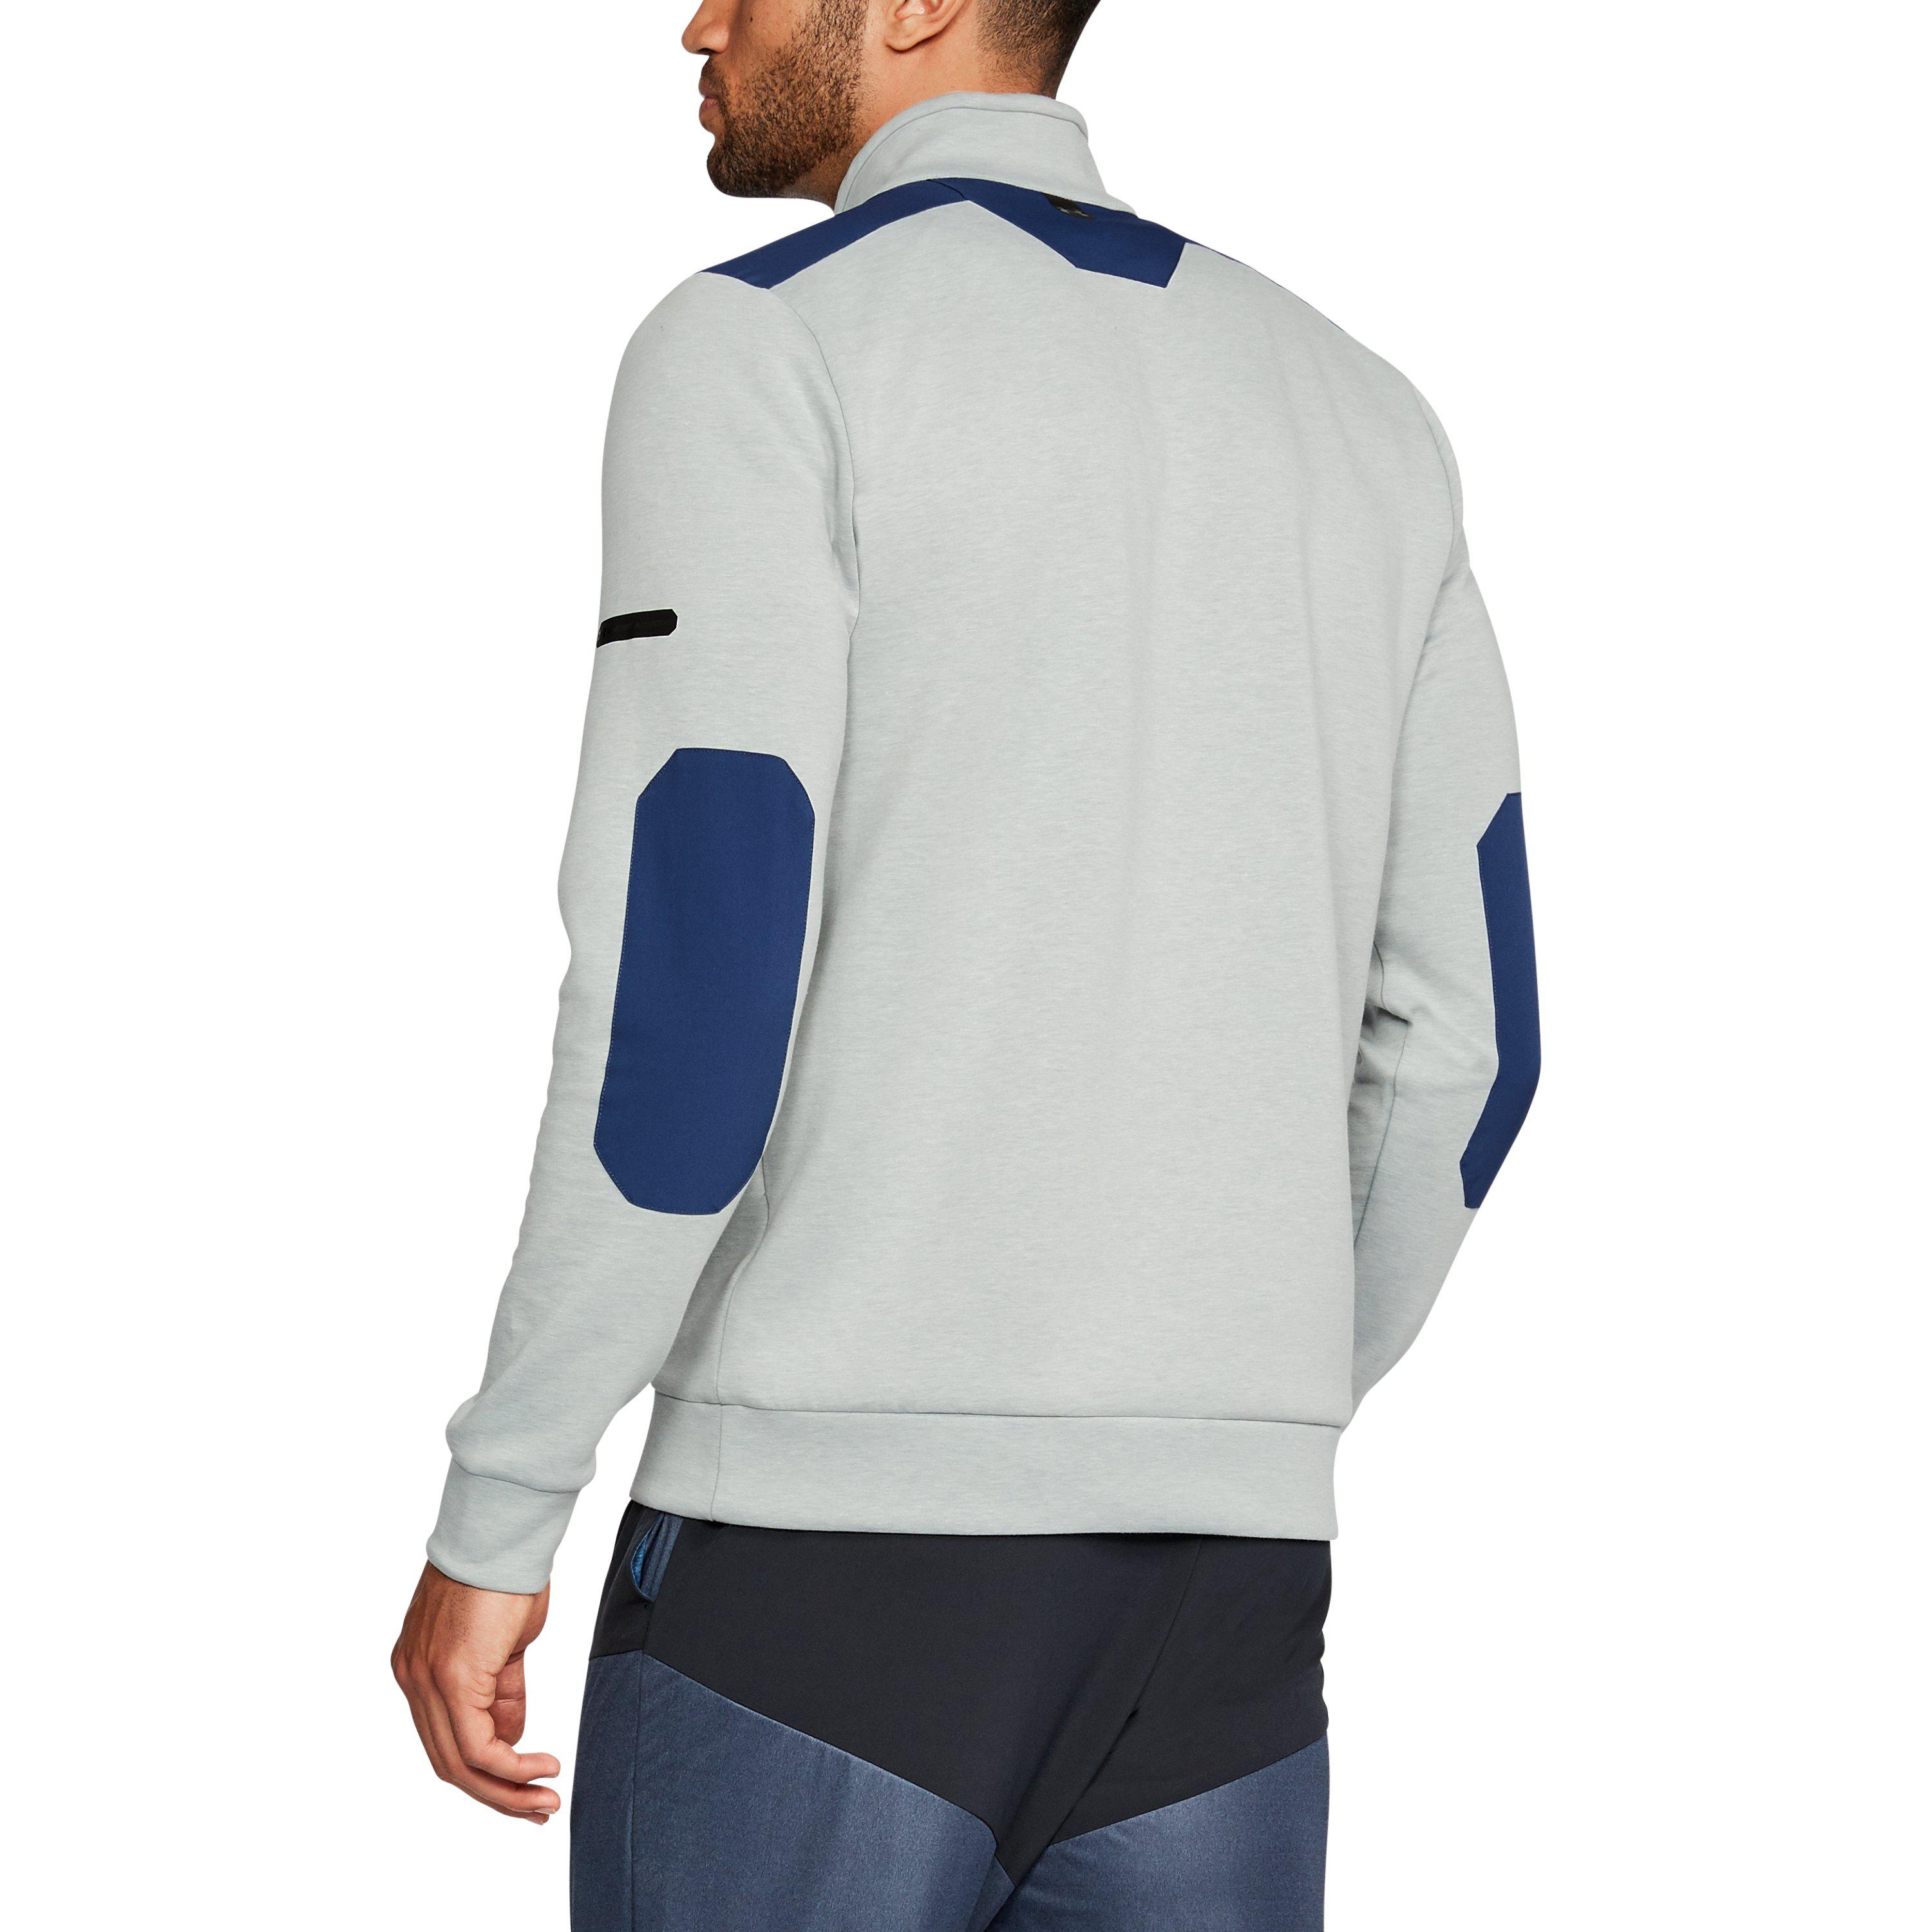 under armour unstoppable knit henley